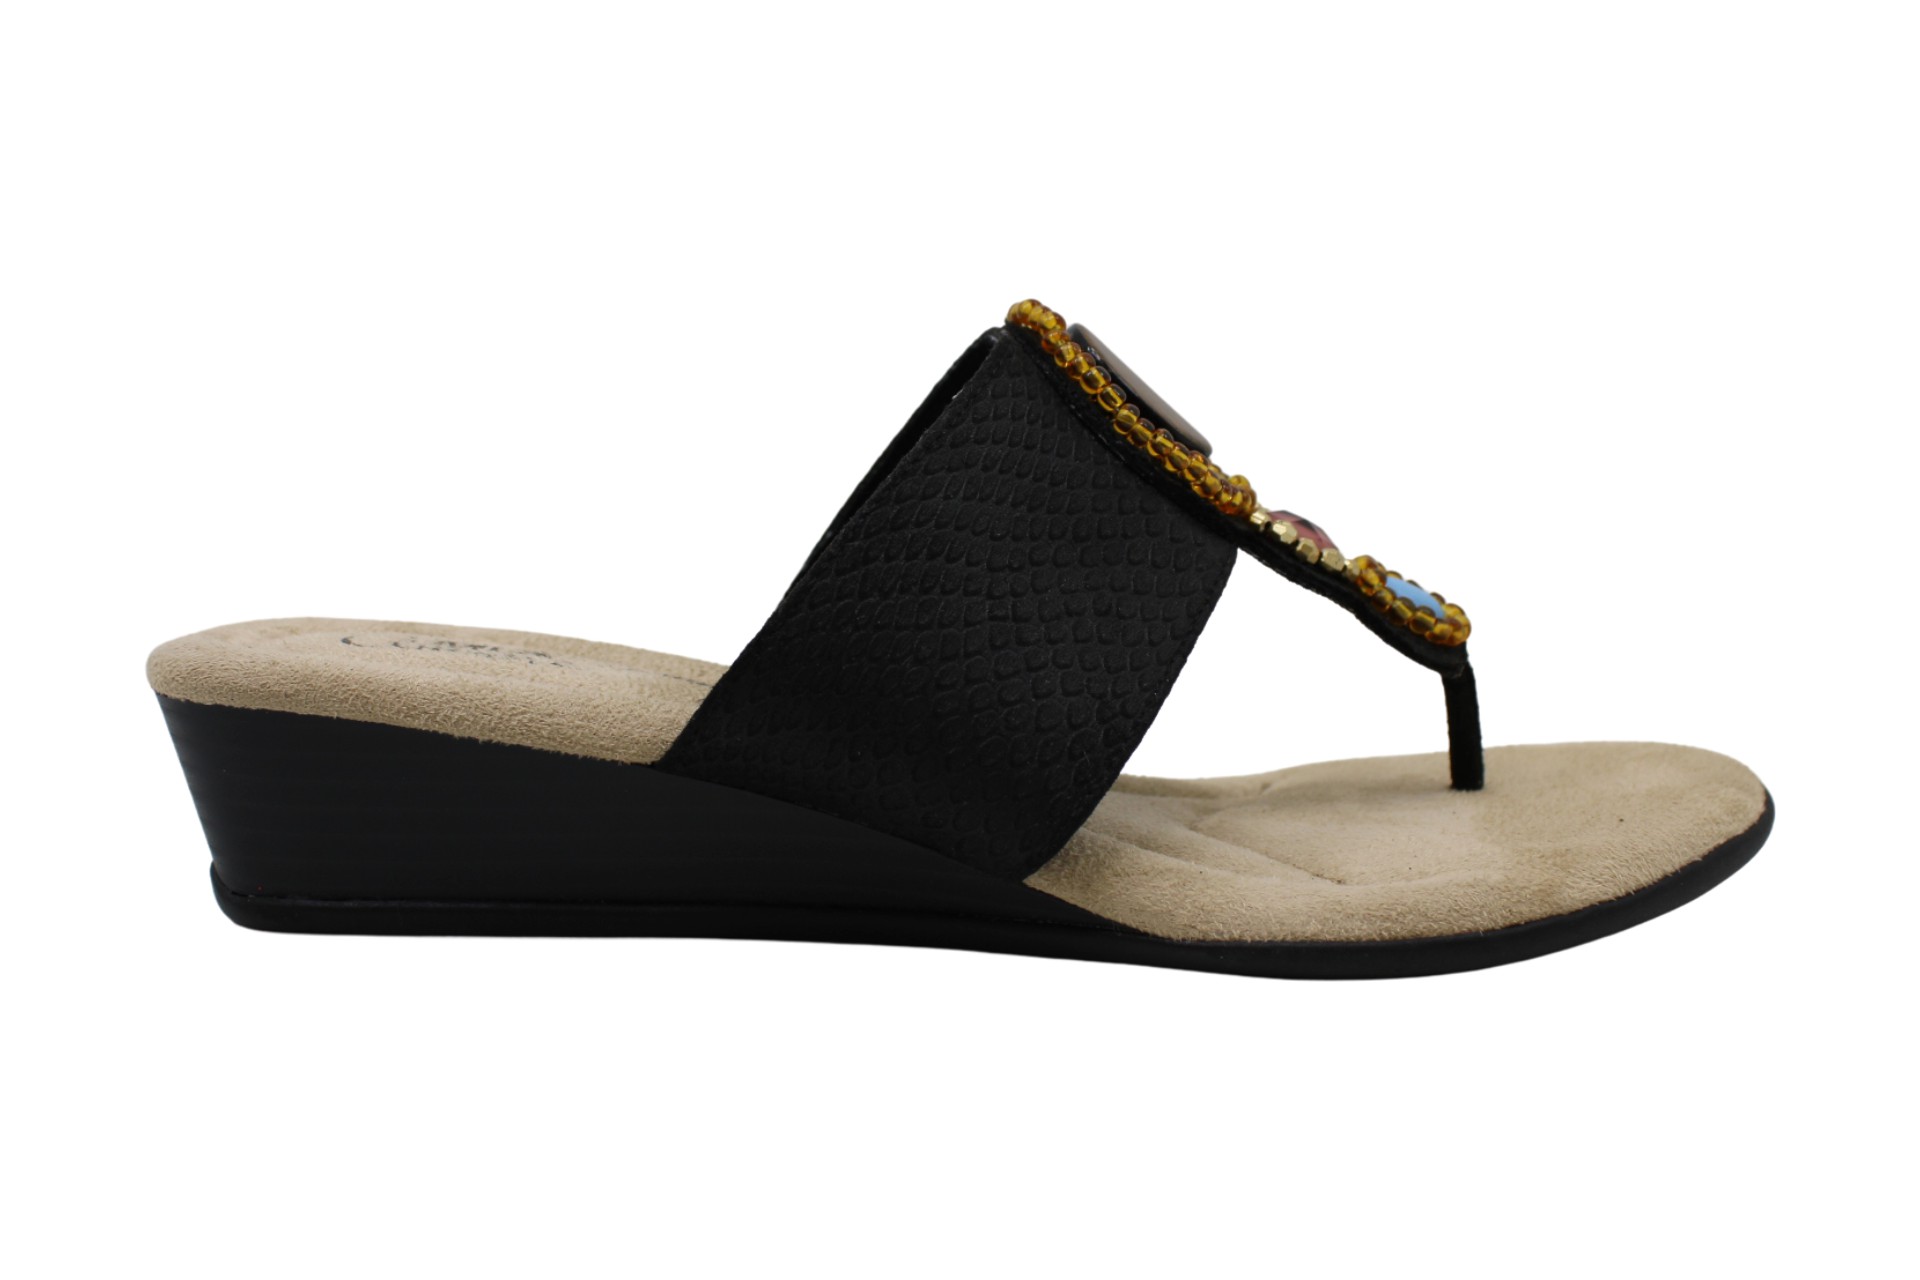 Mia Womens Wedged Sandals in Black Color, Size 8 QAV | eBay